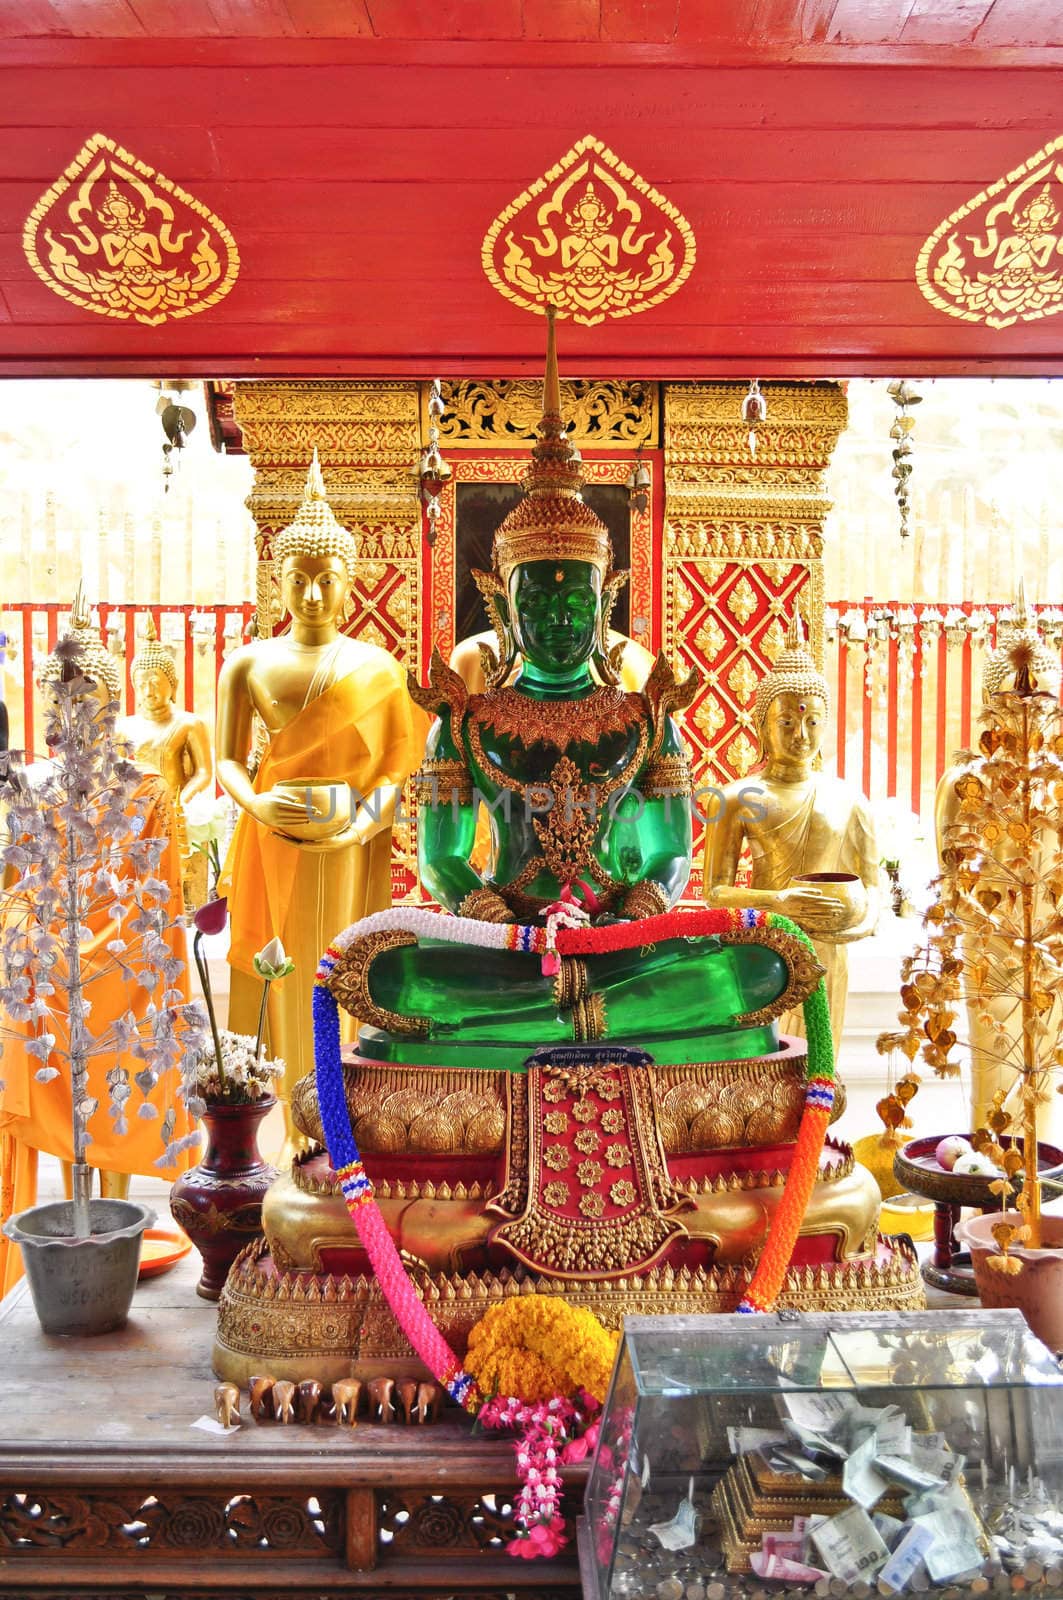 A jade color buddha statue in Thailand